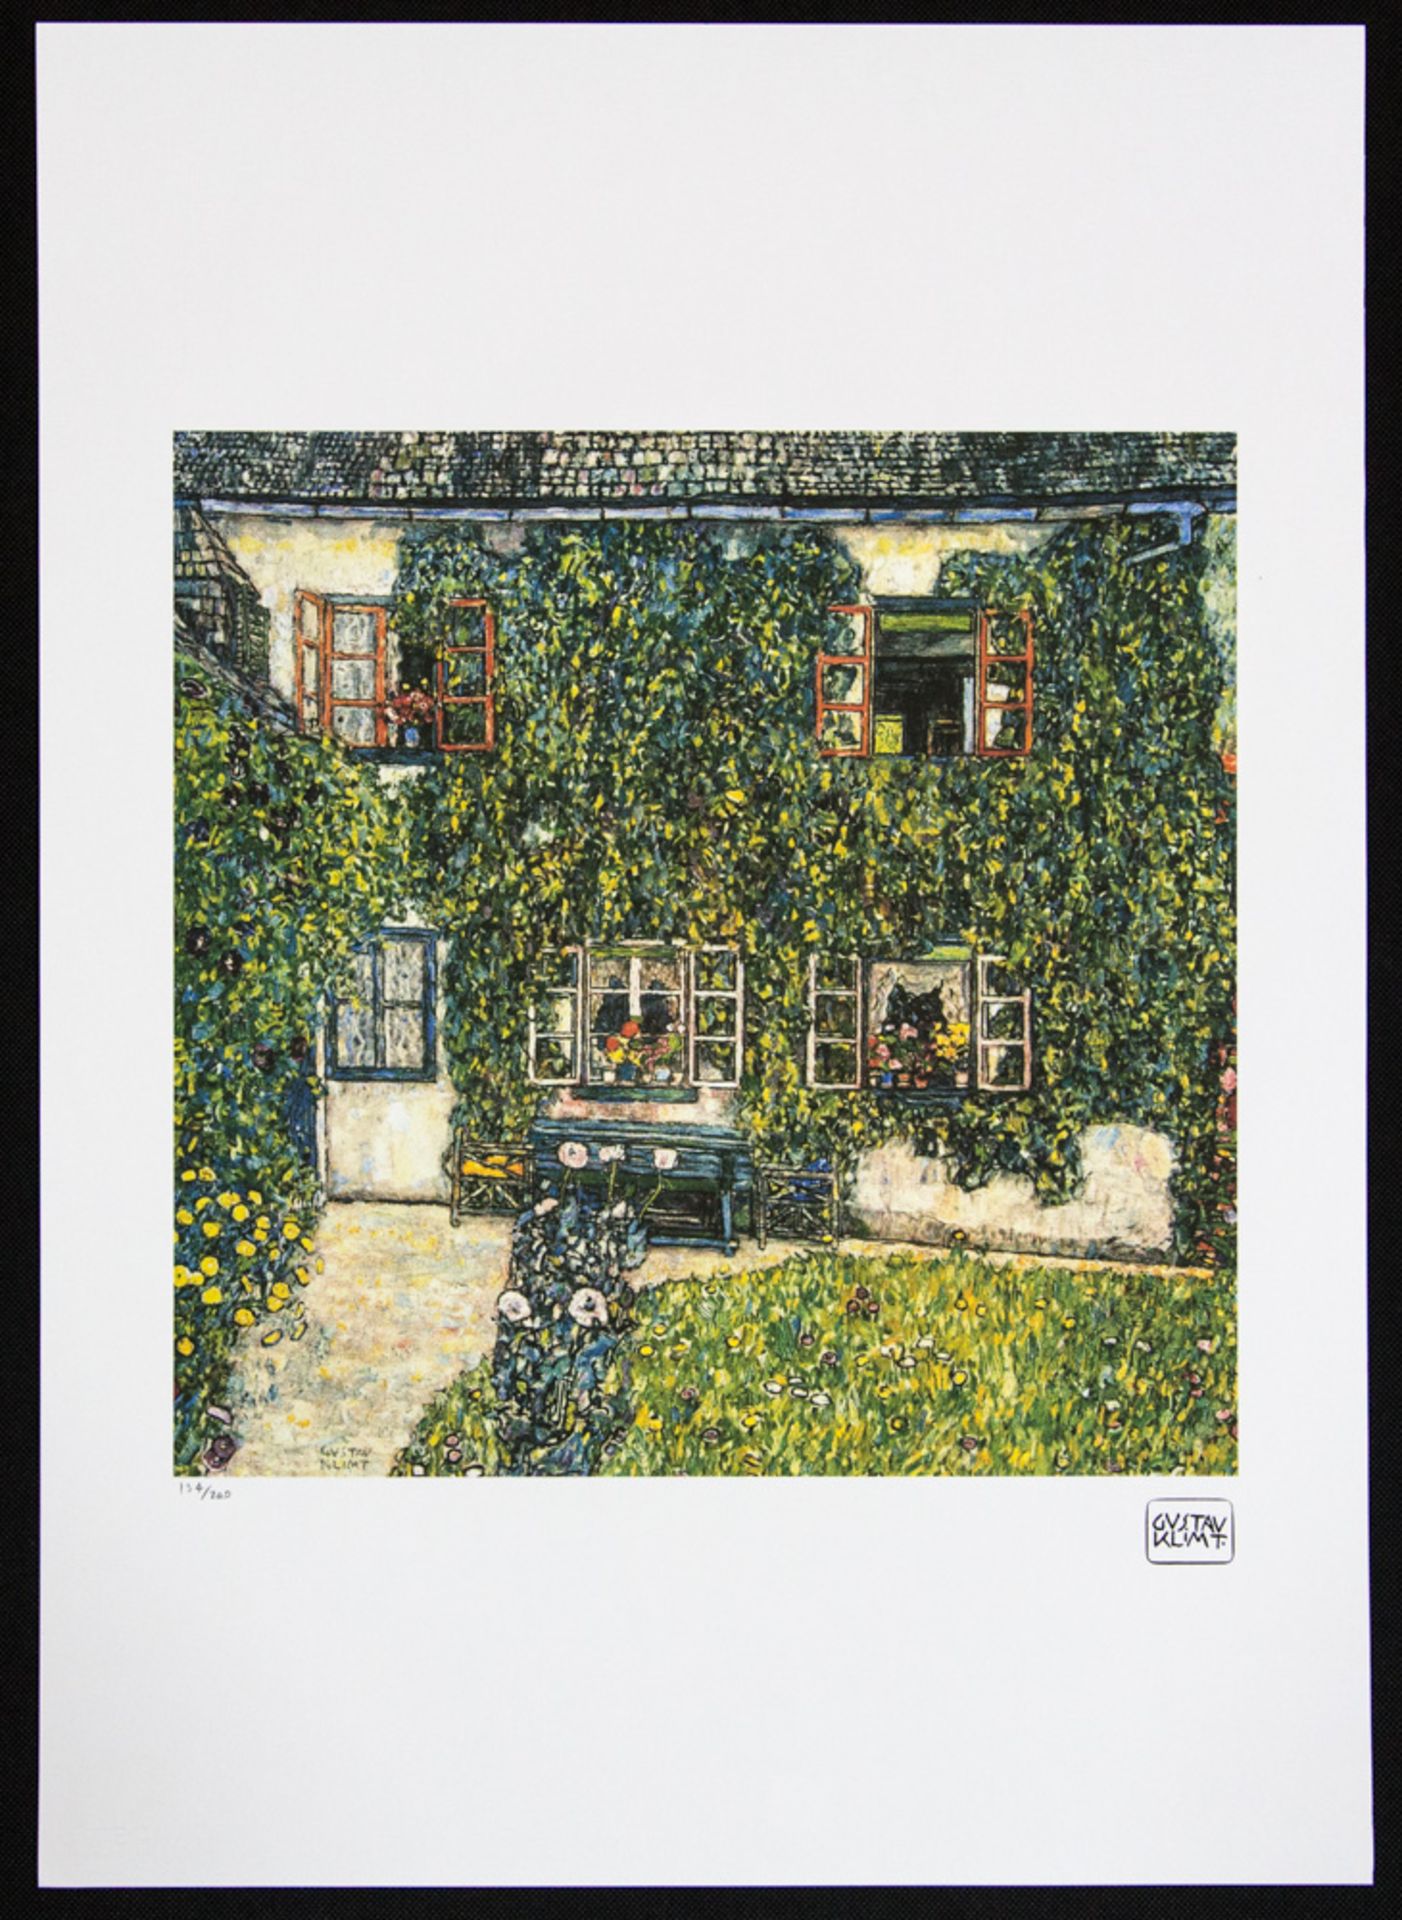 Gustav Klimt 'Forester House in Weissenbach on the Attersee' - Image 2 of 5